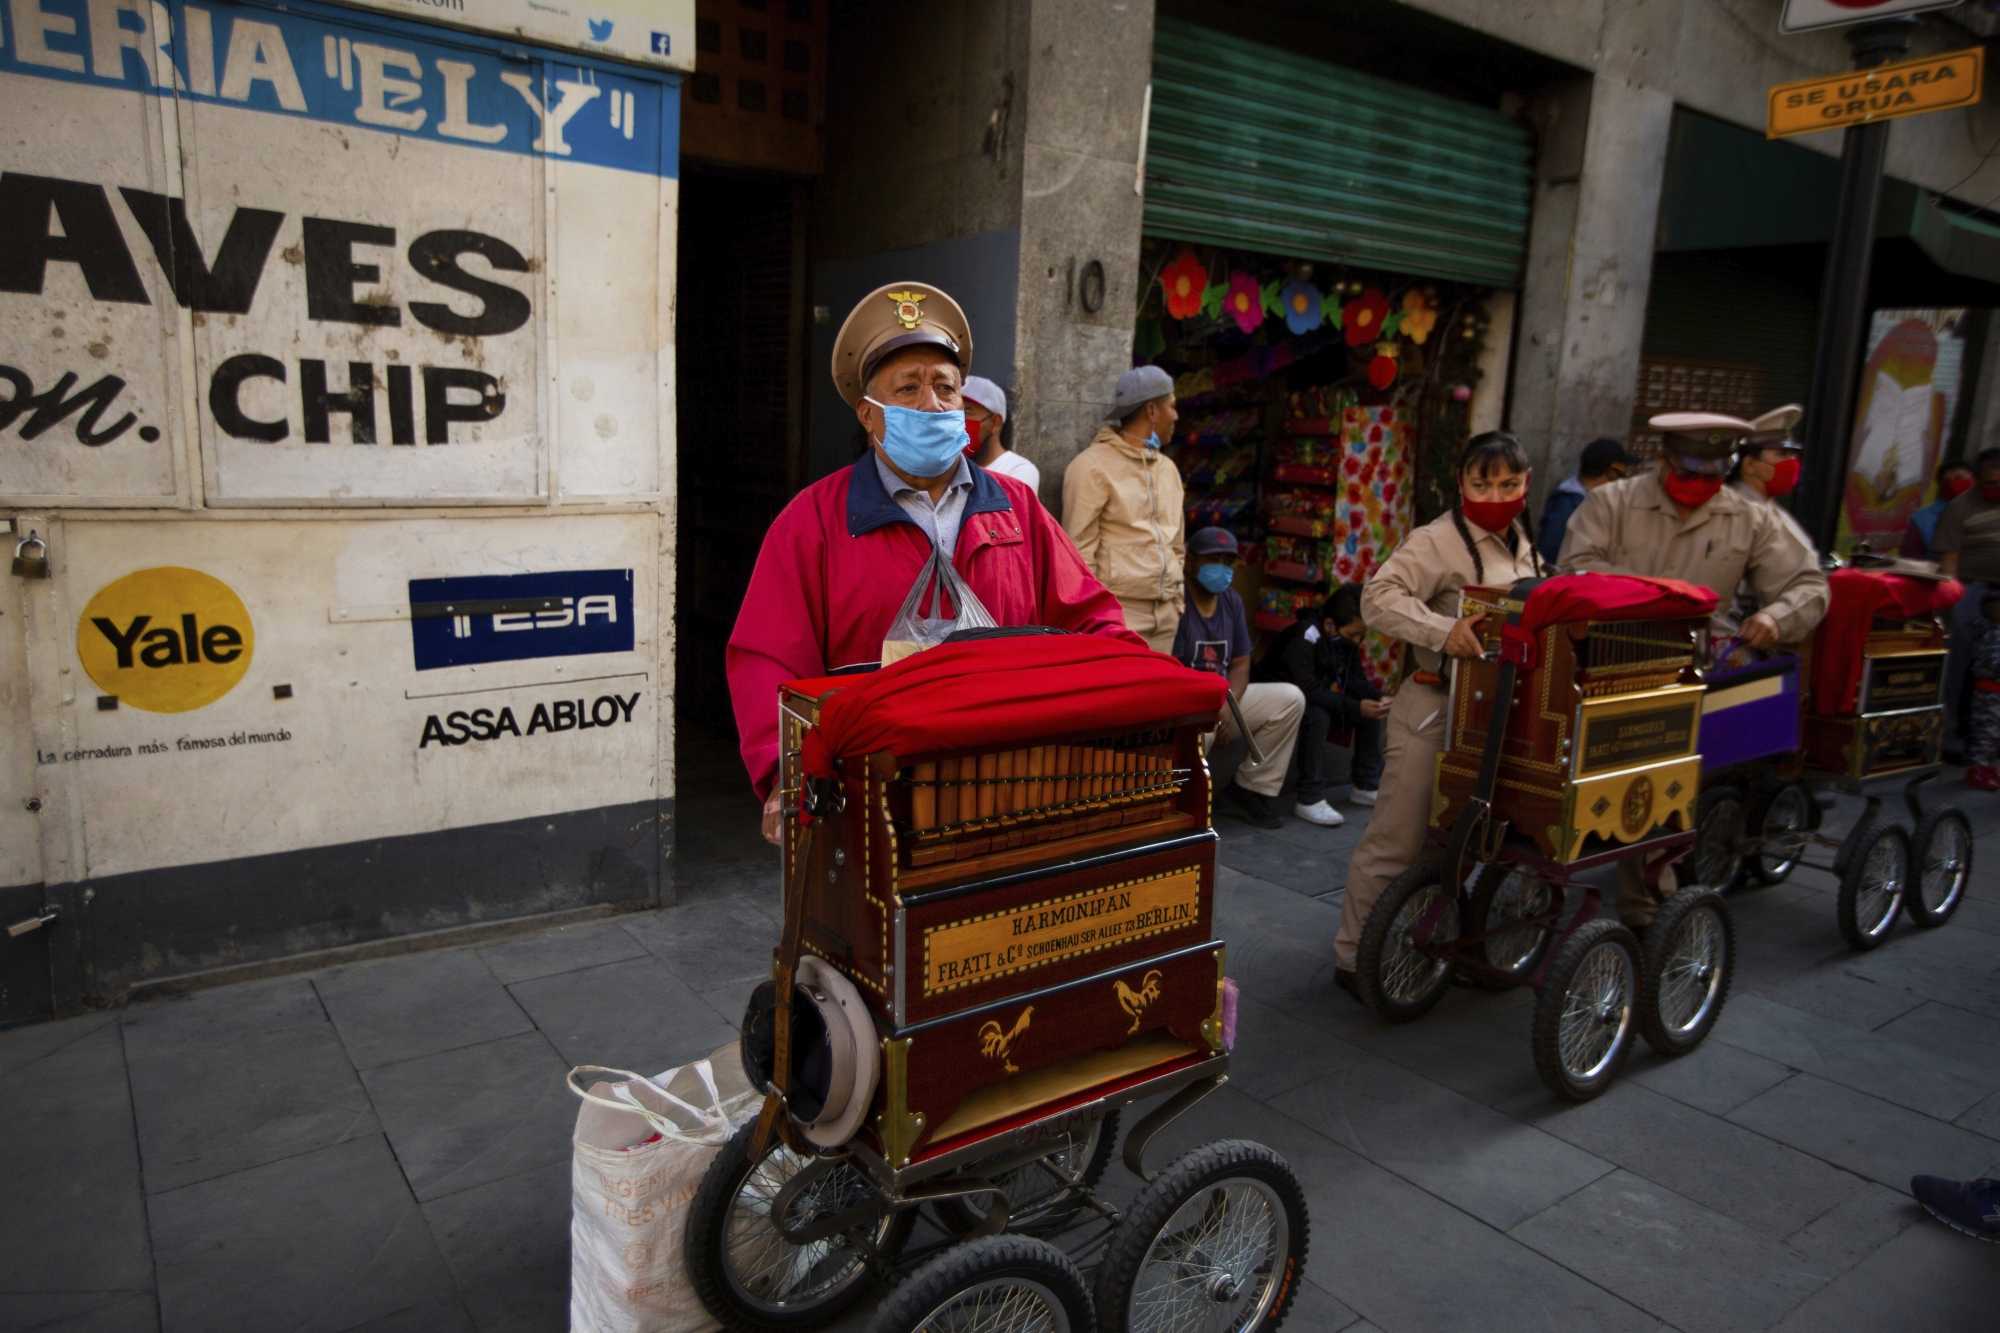 Organ grinders who make money on tips by pedestrians wait for donated groceries in Mexico City, Thursday, June 4, 2020. CADENA, a non-profit, civil organization dedicated to assisting during emergencies and disasters around the world, delivered groceries to hundreds of organ grinders who have lost their source of income due to restrictions amid the new coronavirus. (AP Photo/Fernando Llano)
Juan Antonio Salas
ArcInfo